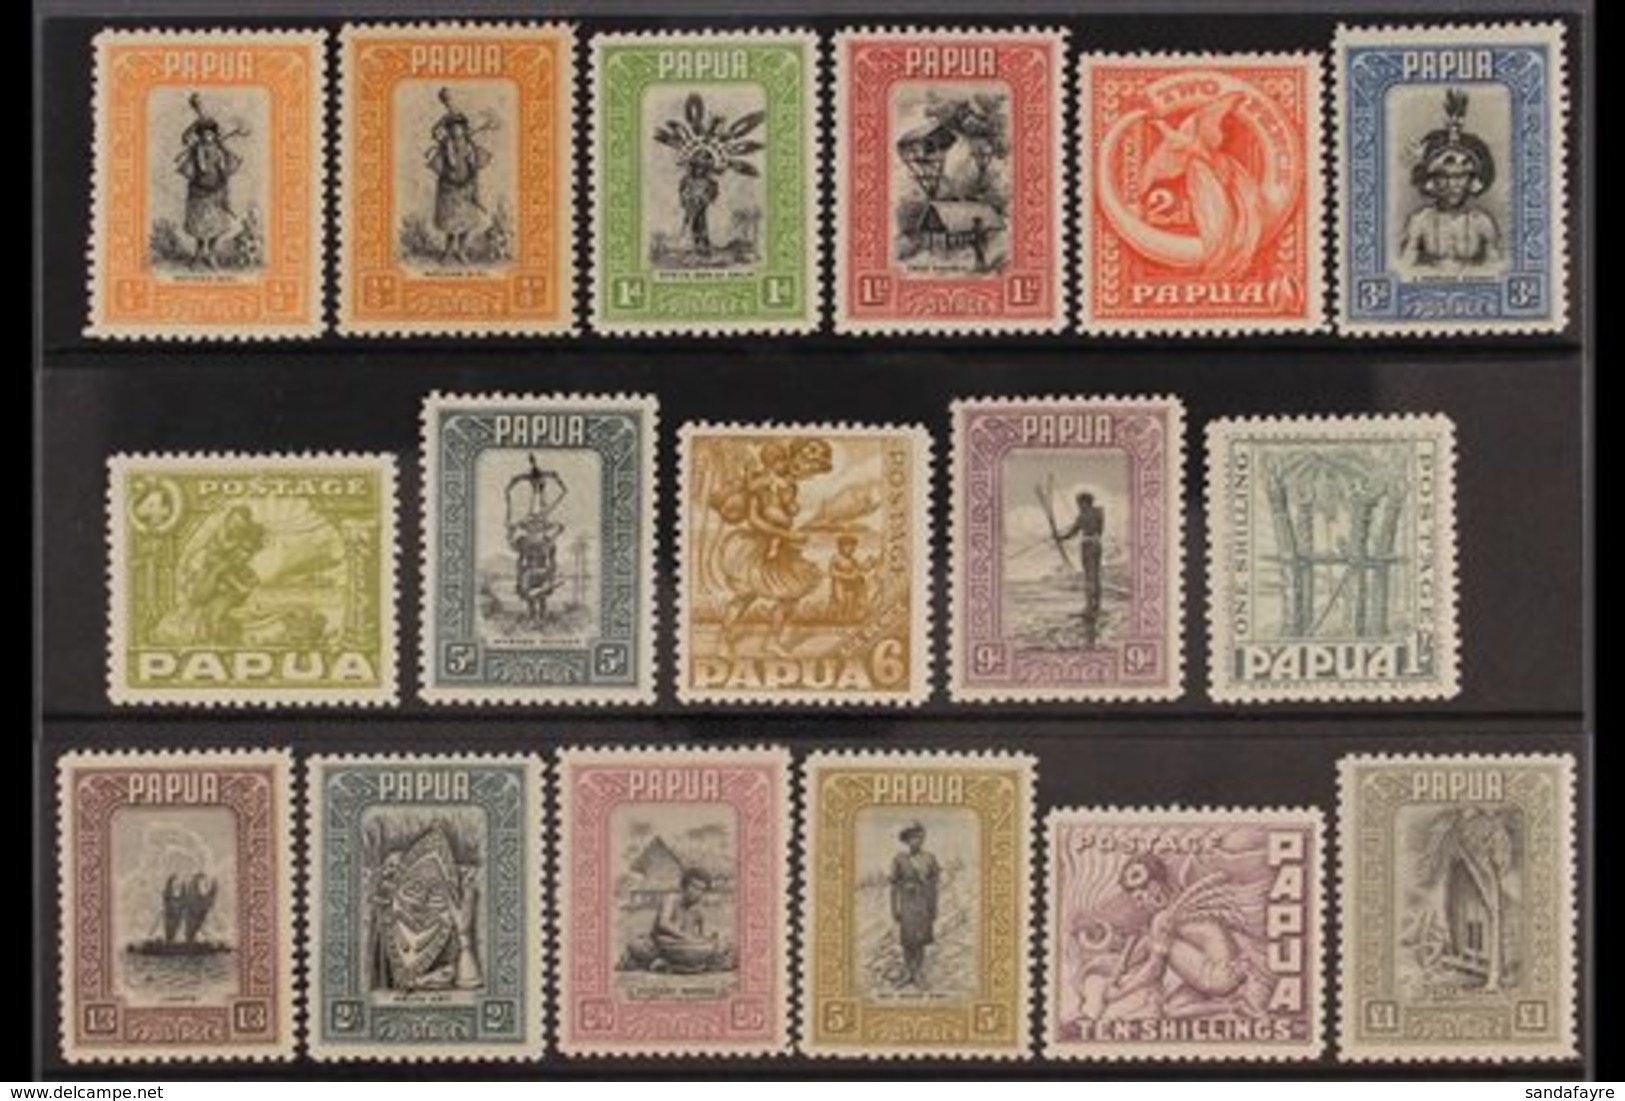 1932-40  Complete Pictorial Definitive Set Including Both ½d Shades, SG 130/145, Mint With Lovely Fresh Colours. (17 Sta - Papua New Guinea